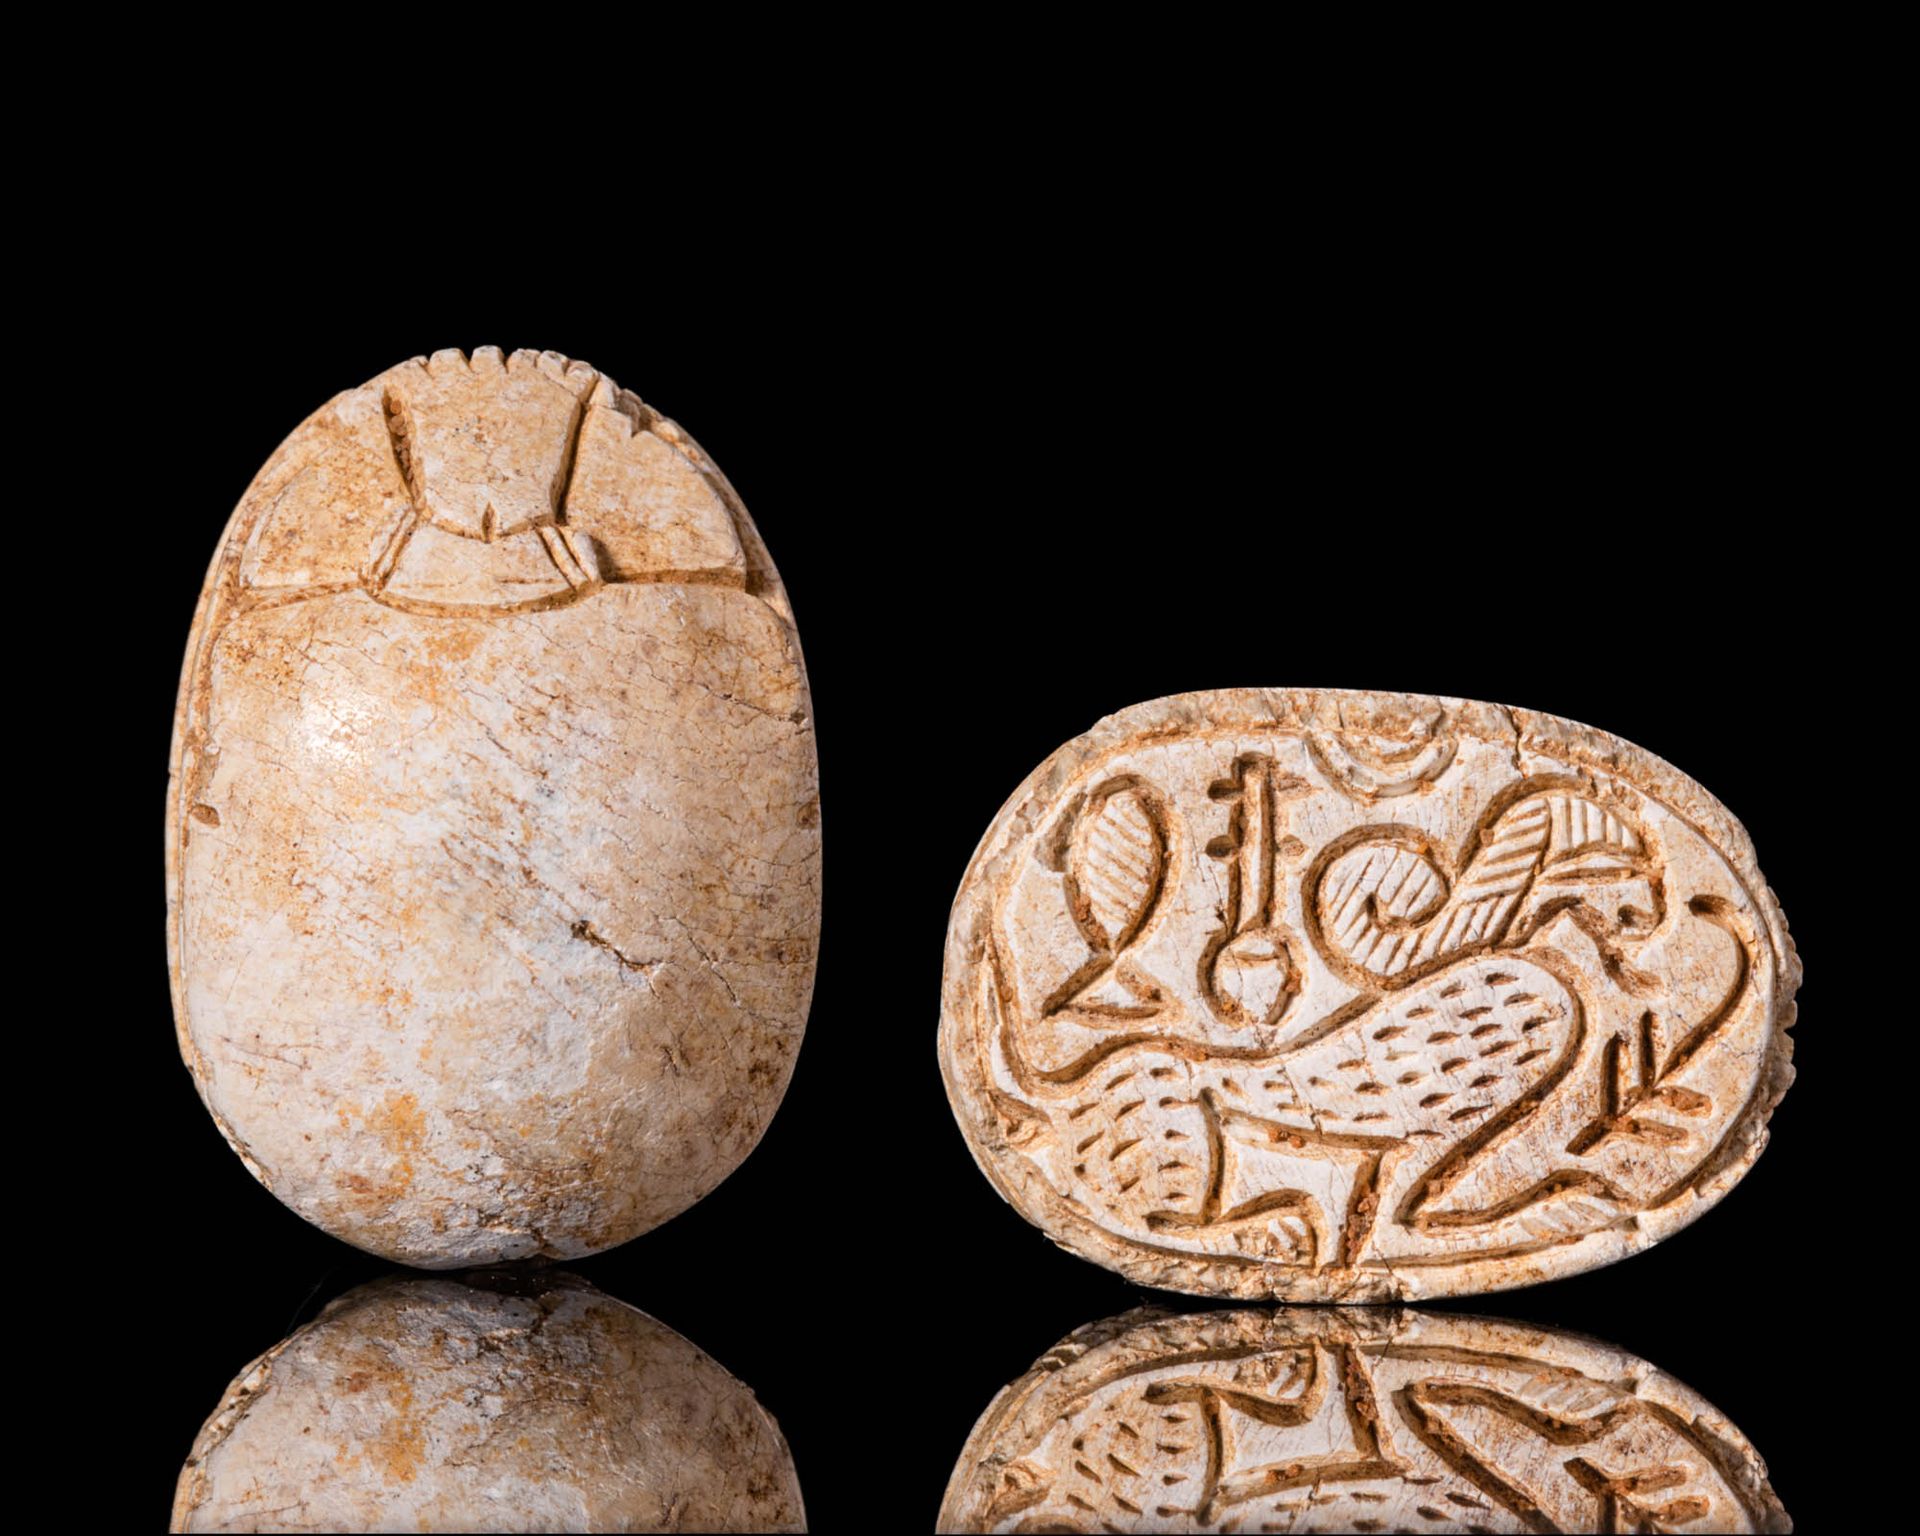 EGYPTIAN STEATITE SCARAB WITH DEPICTION OF A LION 第二中期，约公元前 1700-1550 年 .公元前 170&hellip;